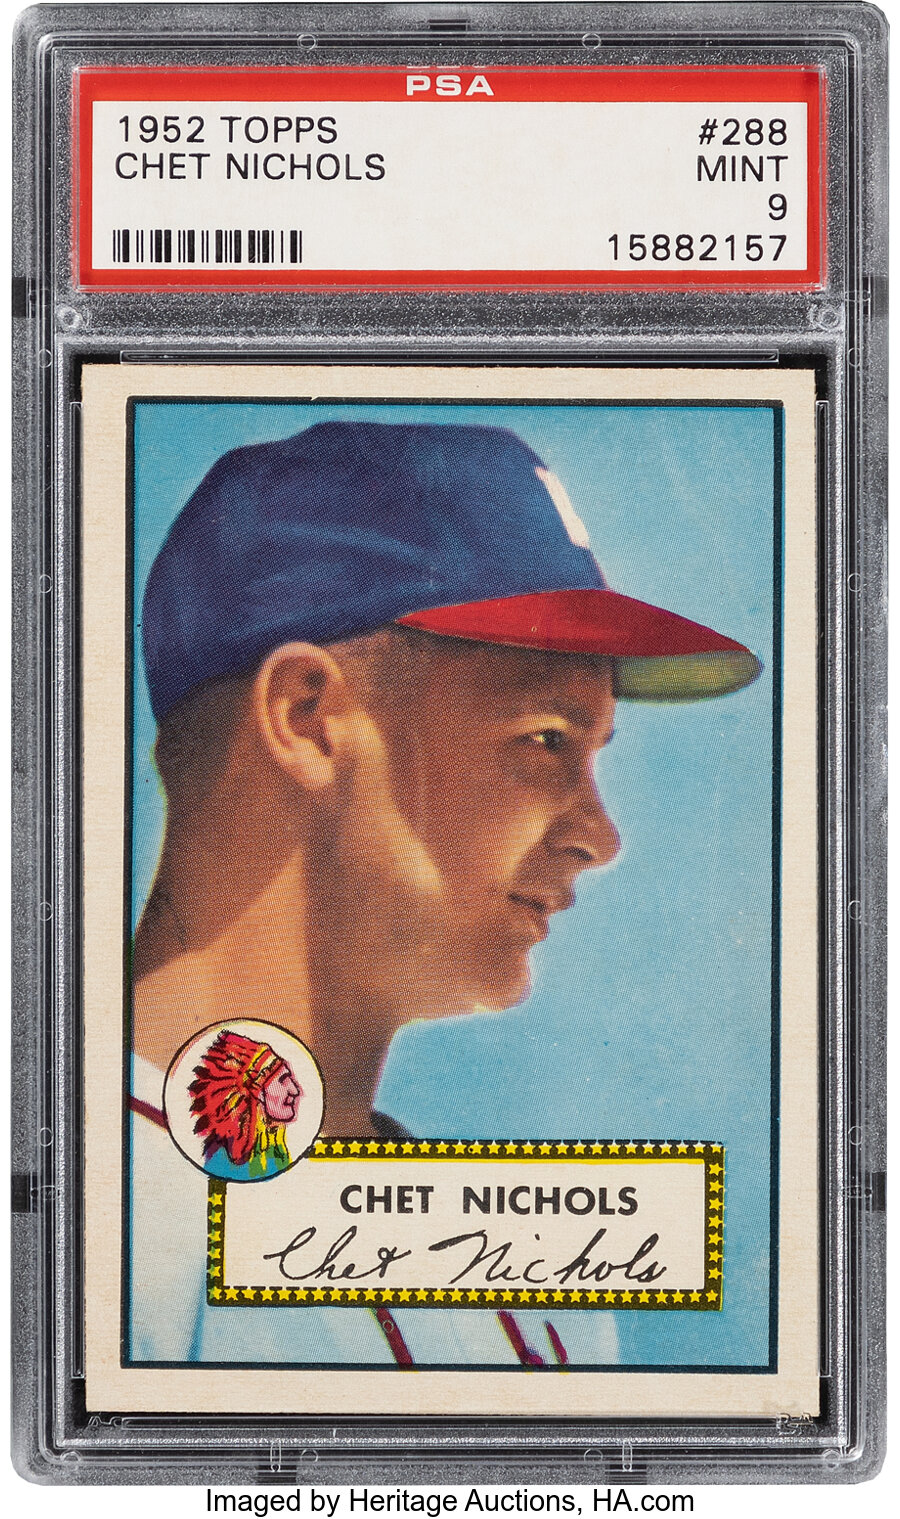 1952 Topps Chet Nichols Rookie #288 PSA Mint 9 - Only One Higher